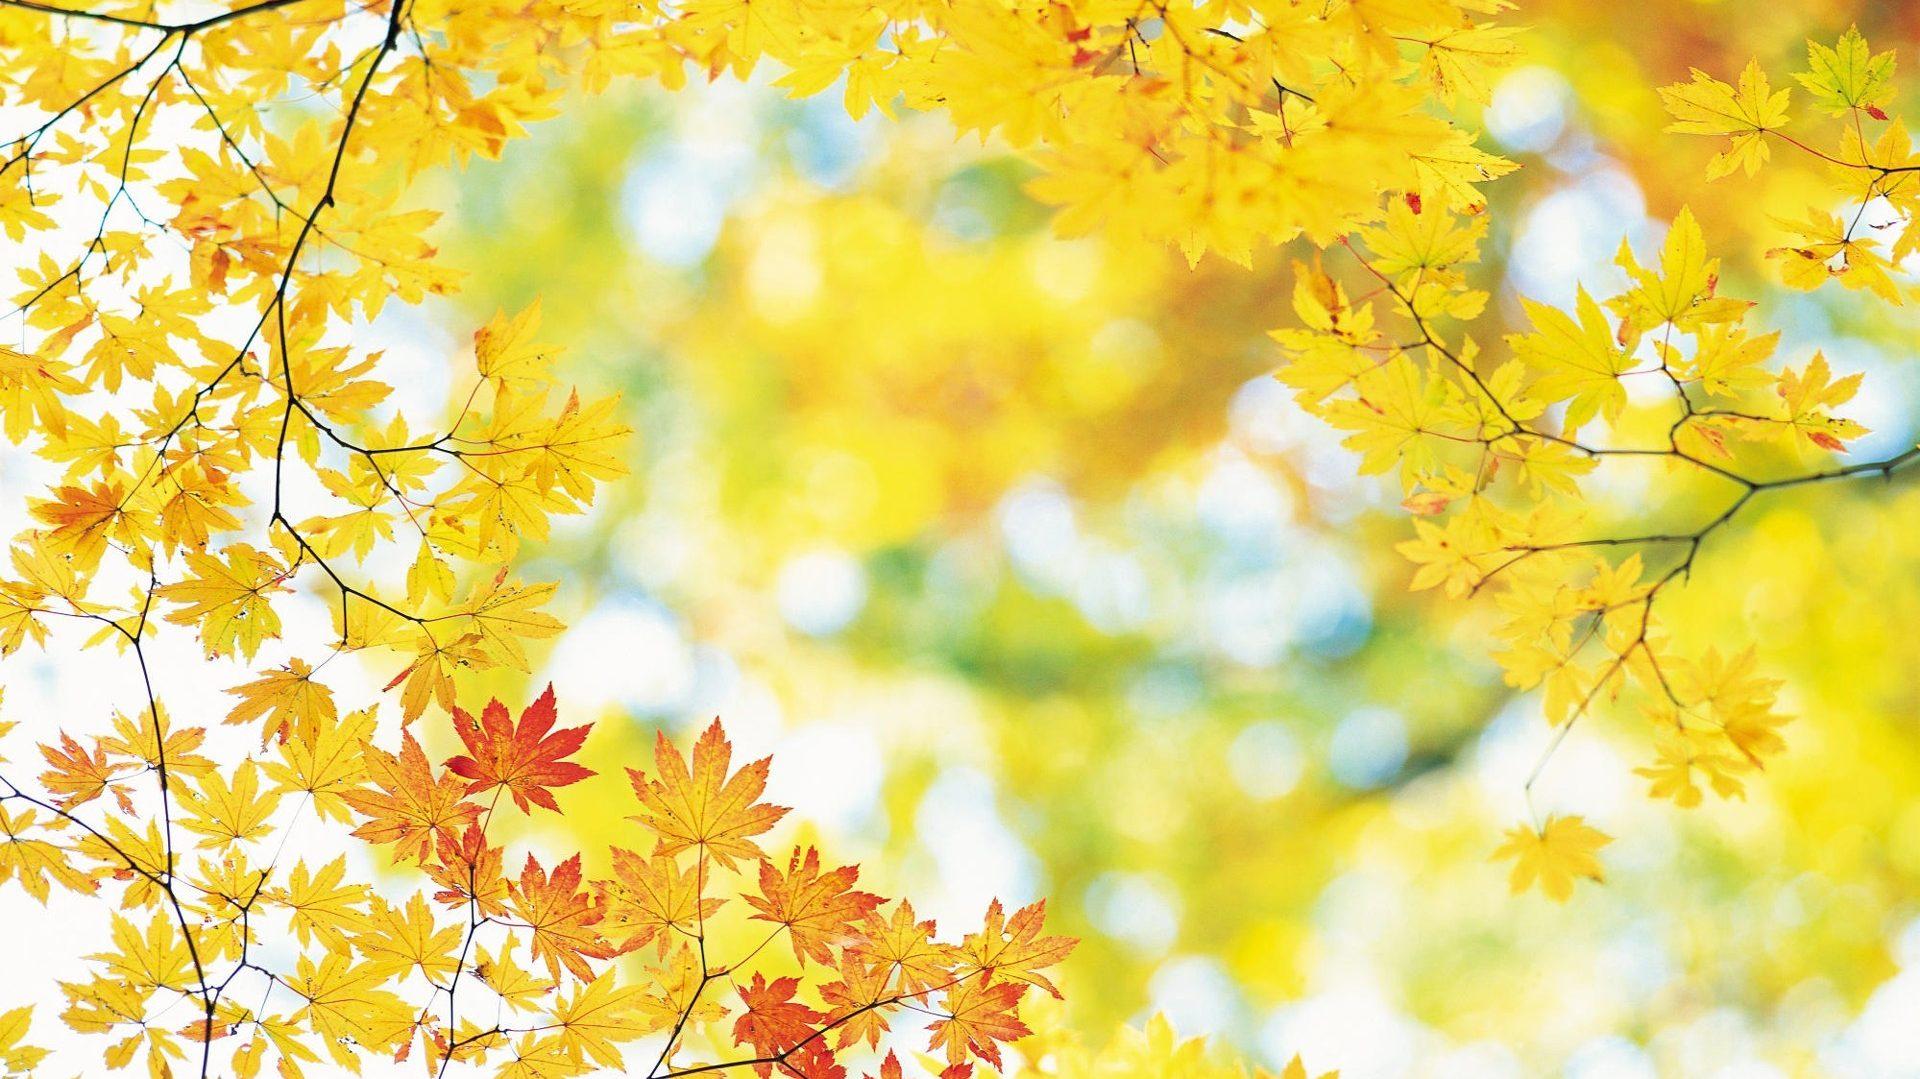 Forests Natural Leaves Gesture Yellow Smiling Fallen Making